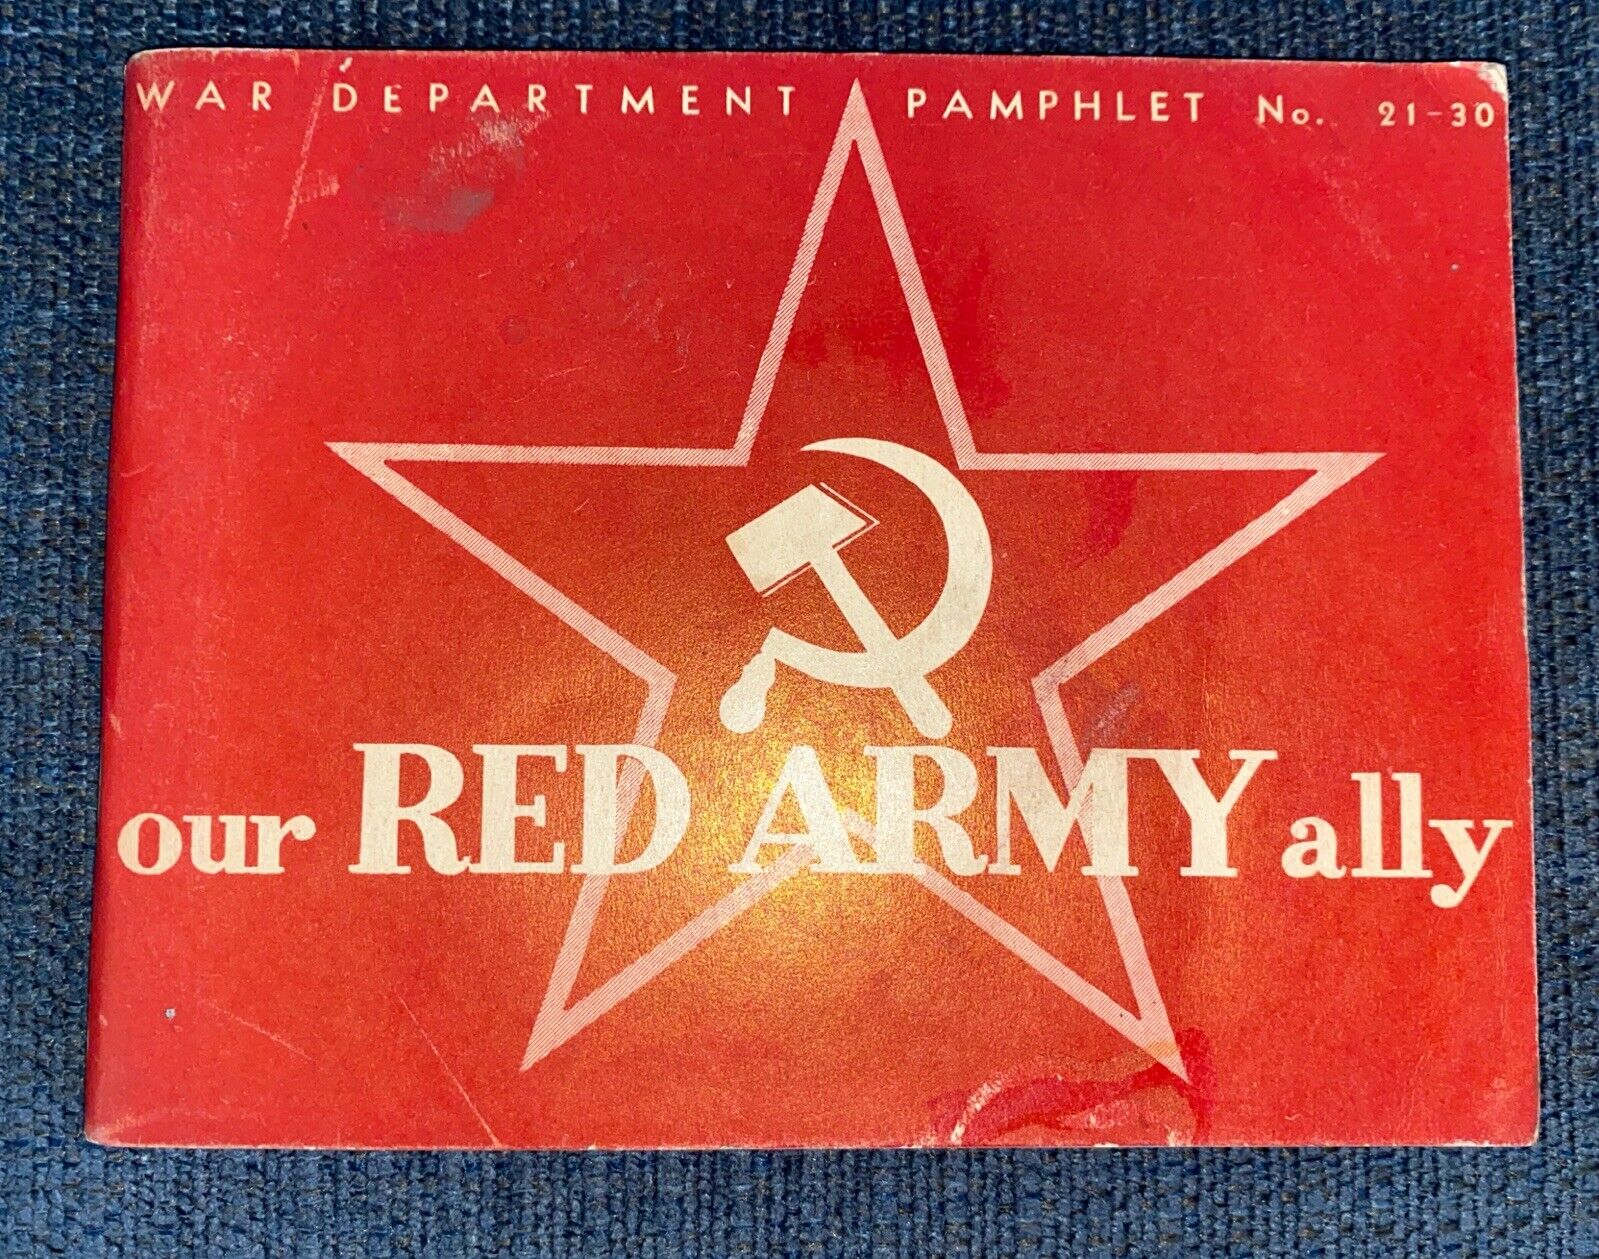 Vintage 1945 WW2 Red Army Ally US Military Army Booklet Pamphlet 21-30